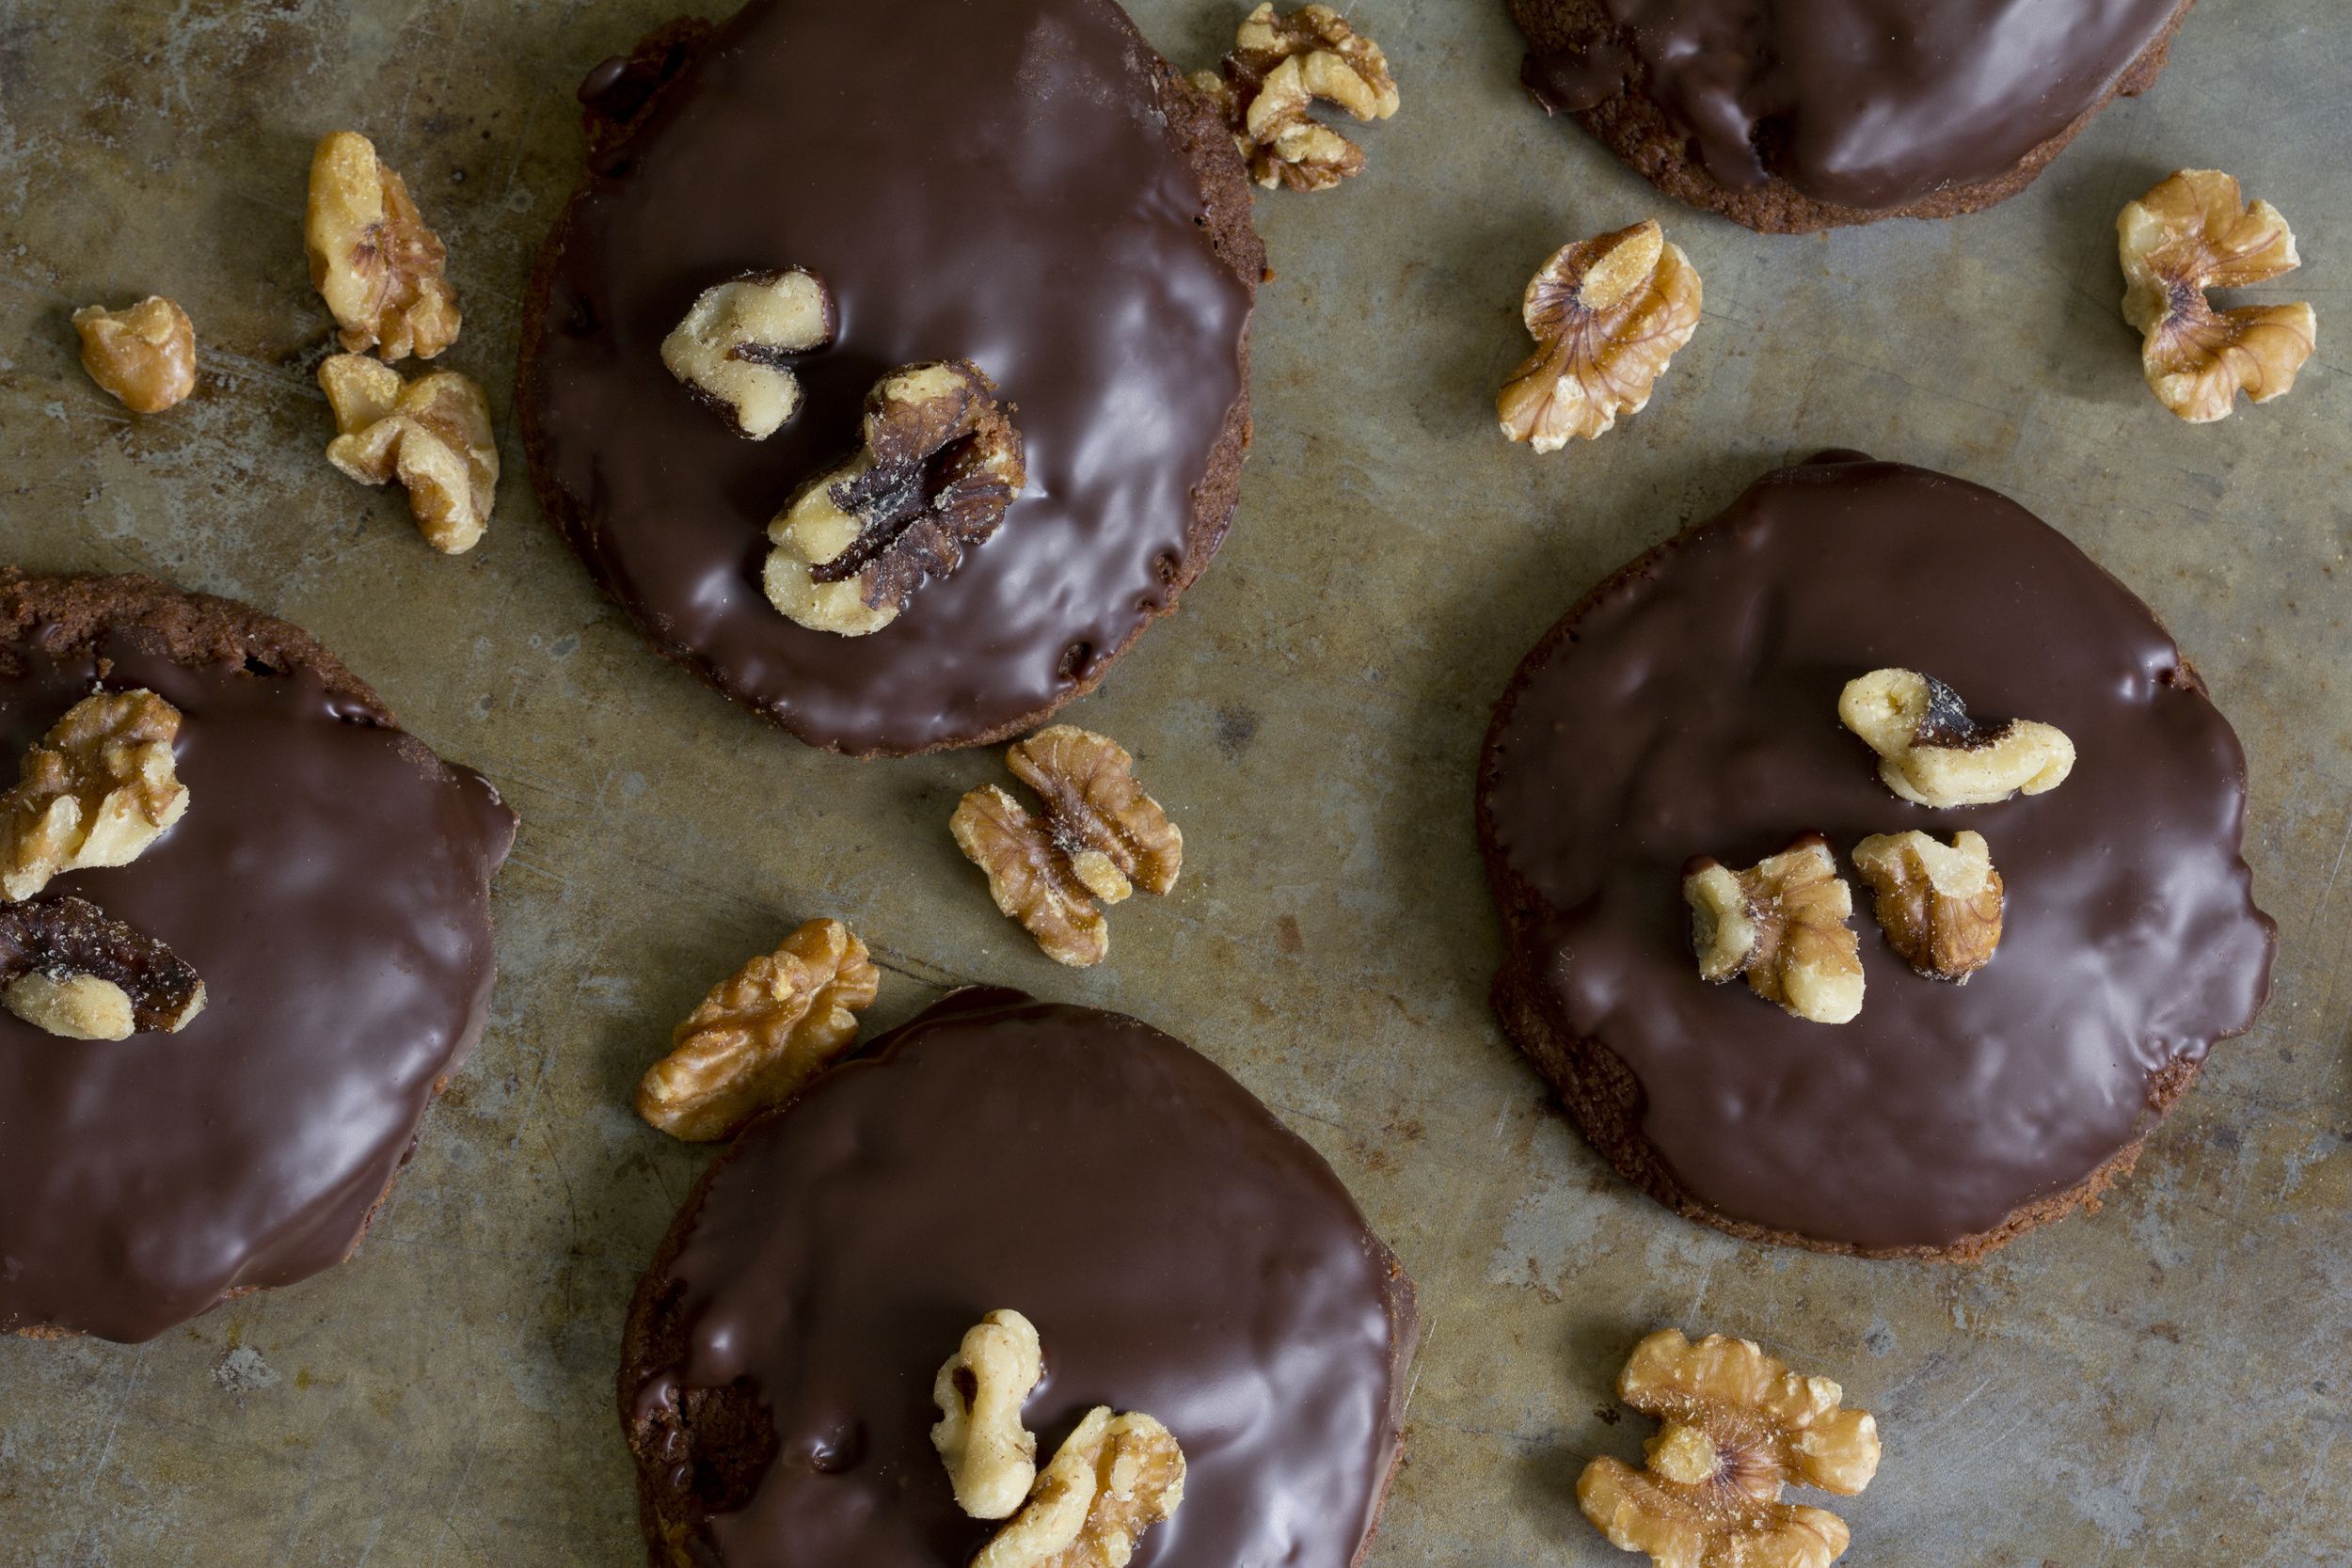 <p>Let’s start with a confusing one! These may be called Afghan biscuits, but they’re not from Afghanistan — they’re a New Zealand treat! Crushed cornflakes and cocoa make up the base of these cookies, which are topped with a chocolate icing and halved walnuts. <a href="https://justamumnz.com/2014/09/22/grandmas-afghan-biscuits/"><span>Just a Mum’s Kitchen</span></a> can explain how to make them and reiterate the mysterious origins of the name.</p><p>You may also like: <a href='https://www.yardbarker.com/lifestyle/articles/22_meals_perfect_for_following_mediterranean_diet/s1__38389200'>22 meals perfect for following Mediterranean diet</a></p>